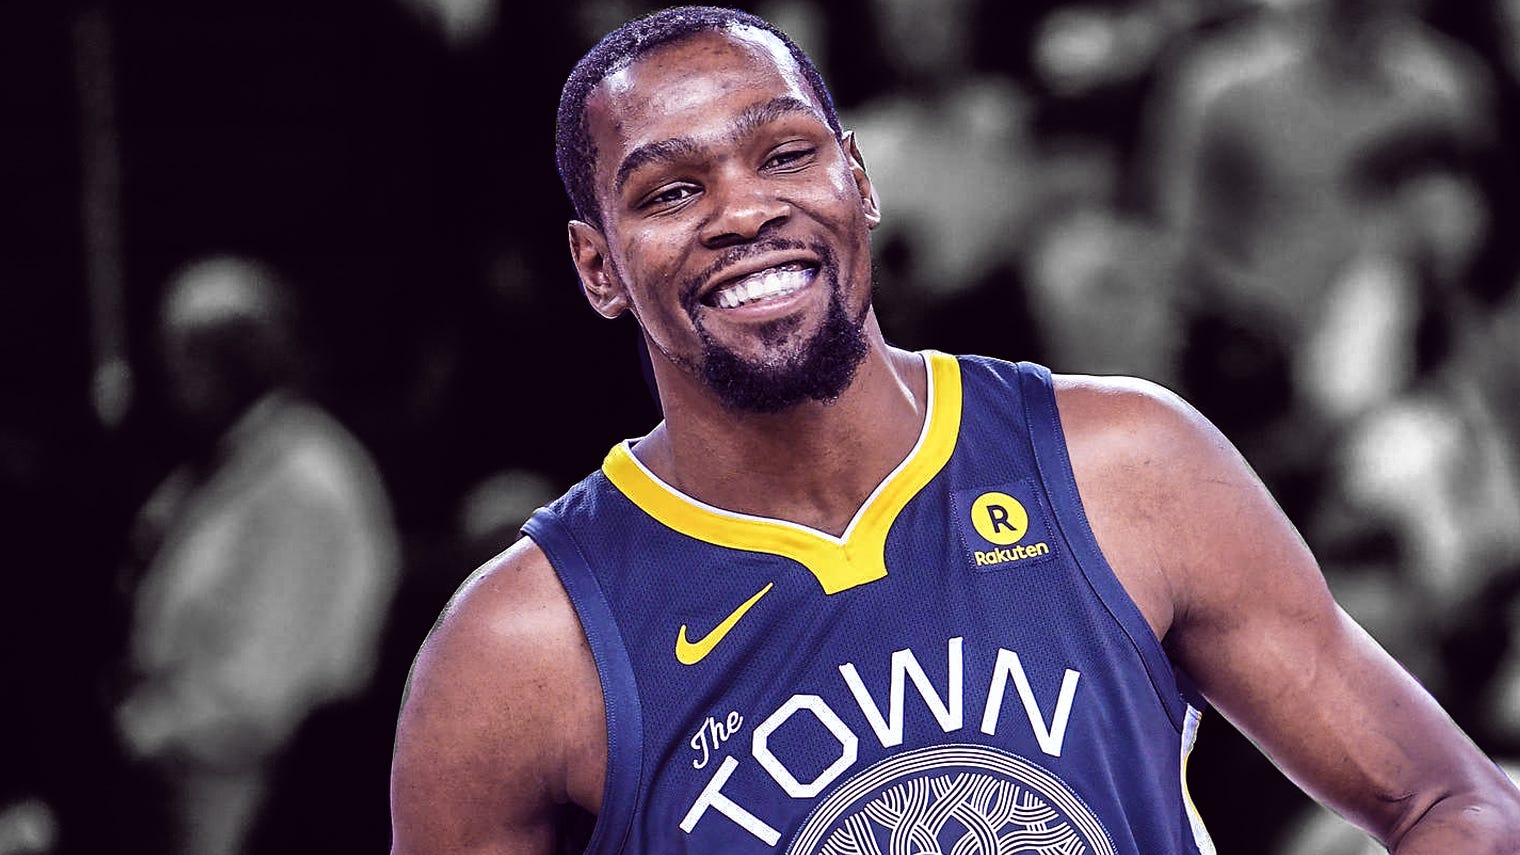 Kevin Durant: Records, stats and other top facts